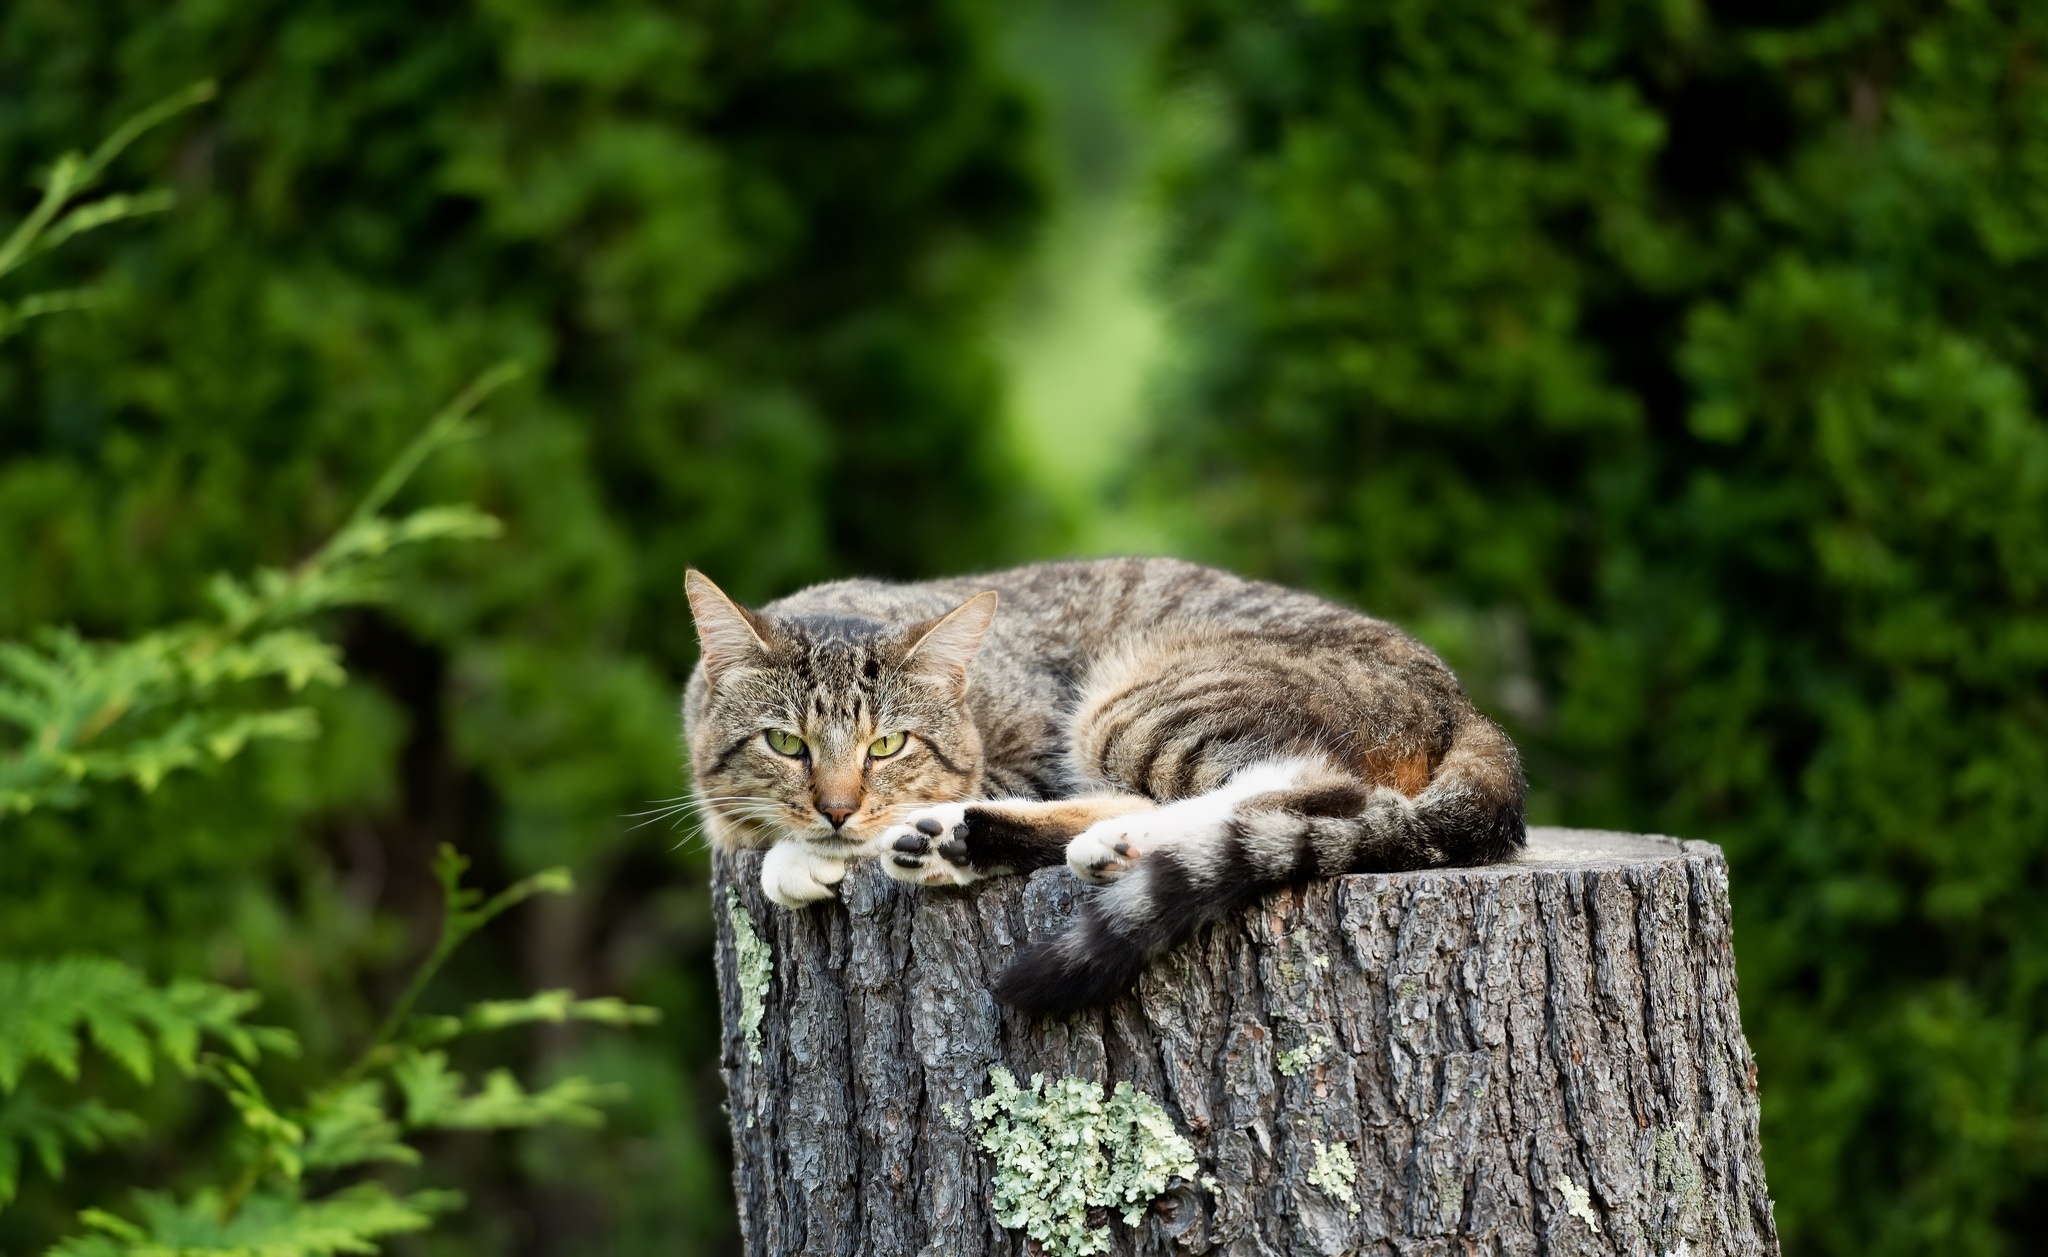 A domestic cat lies on a wooden stump